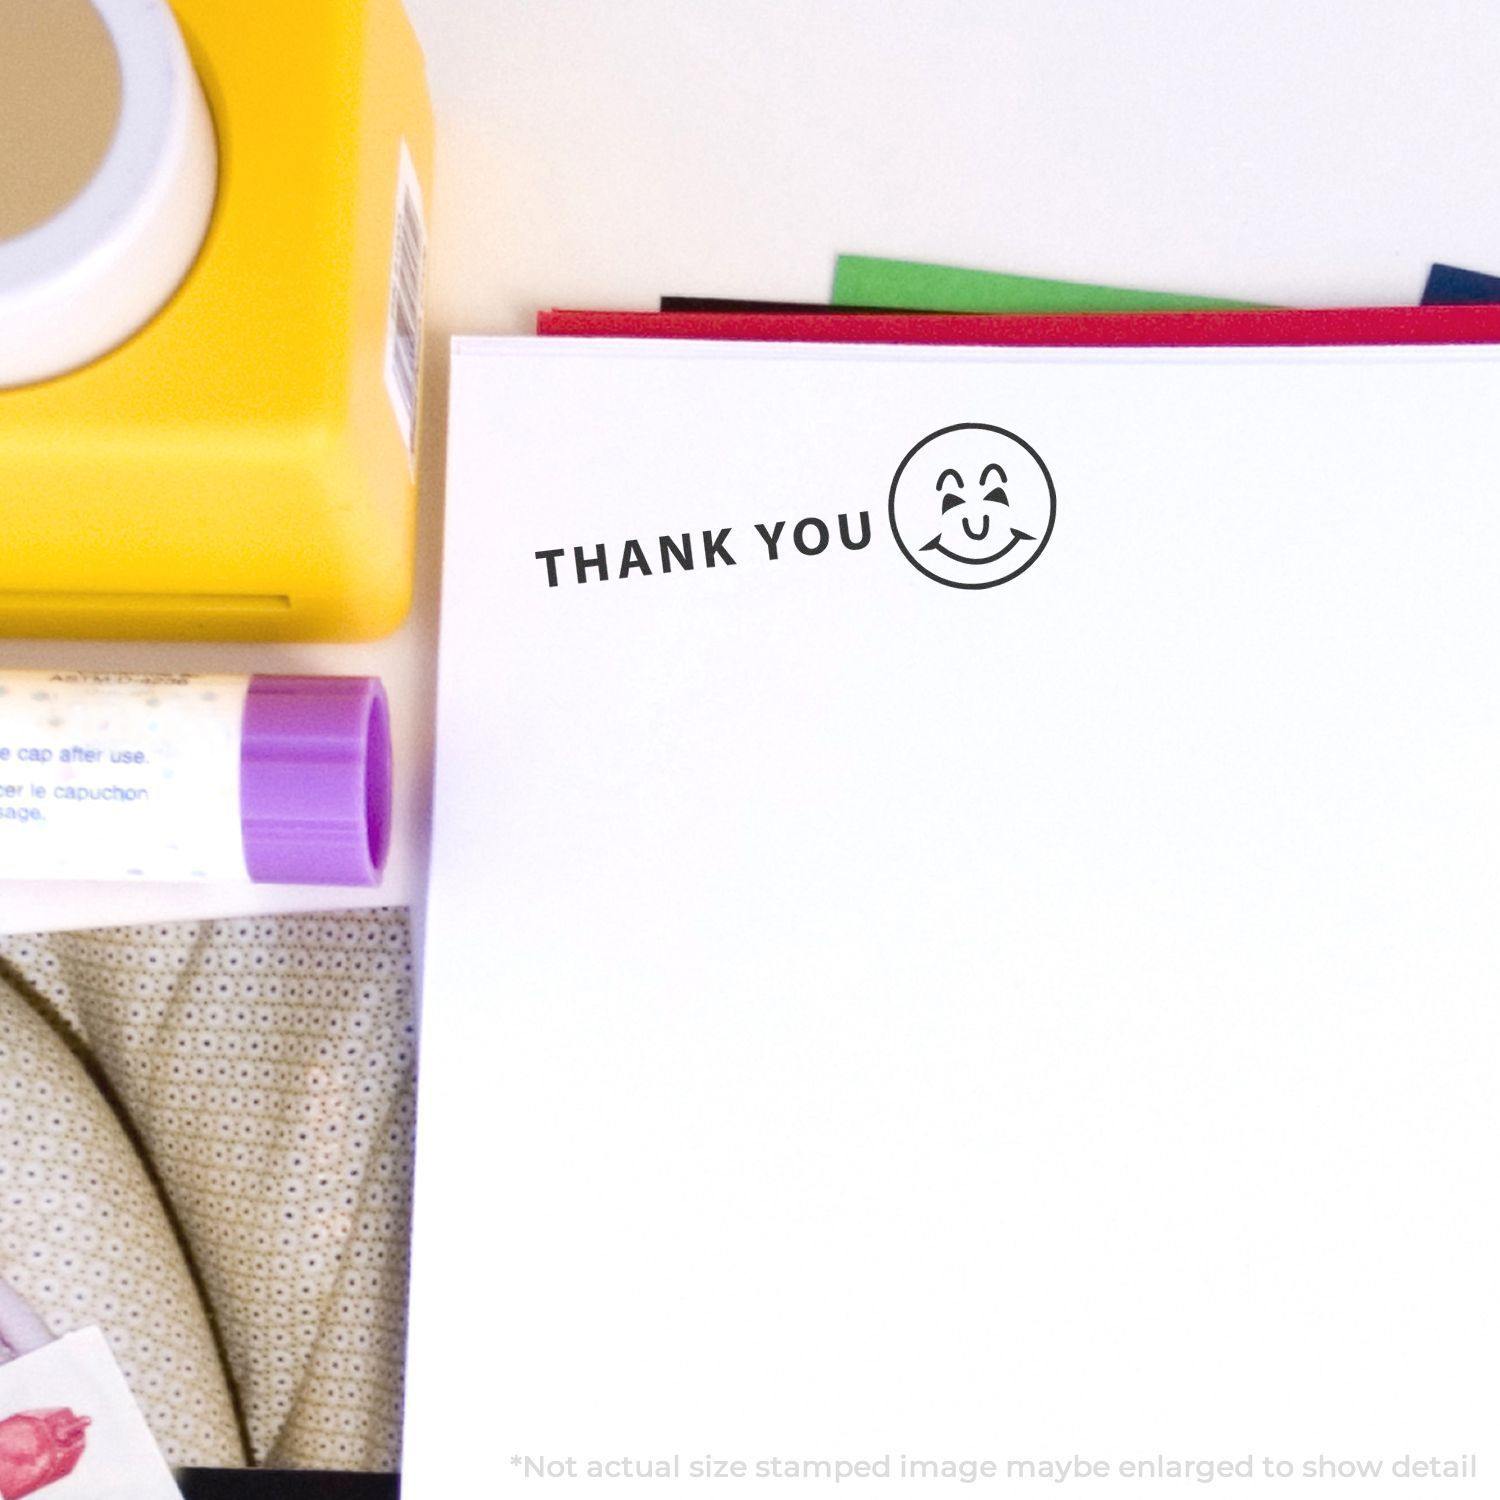 A self-inking stamp with a stamped image showing how the text "THANK YOU" in a large font with an image of a Smiley face on the right side is displayed after stamping.